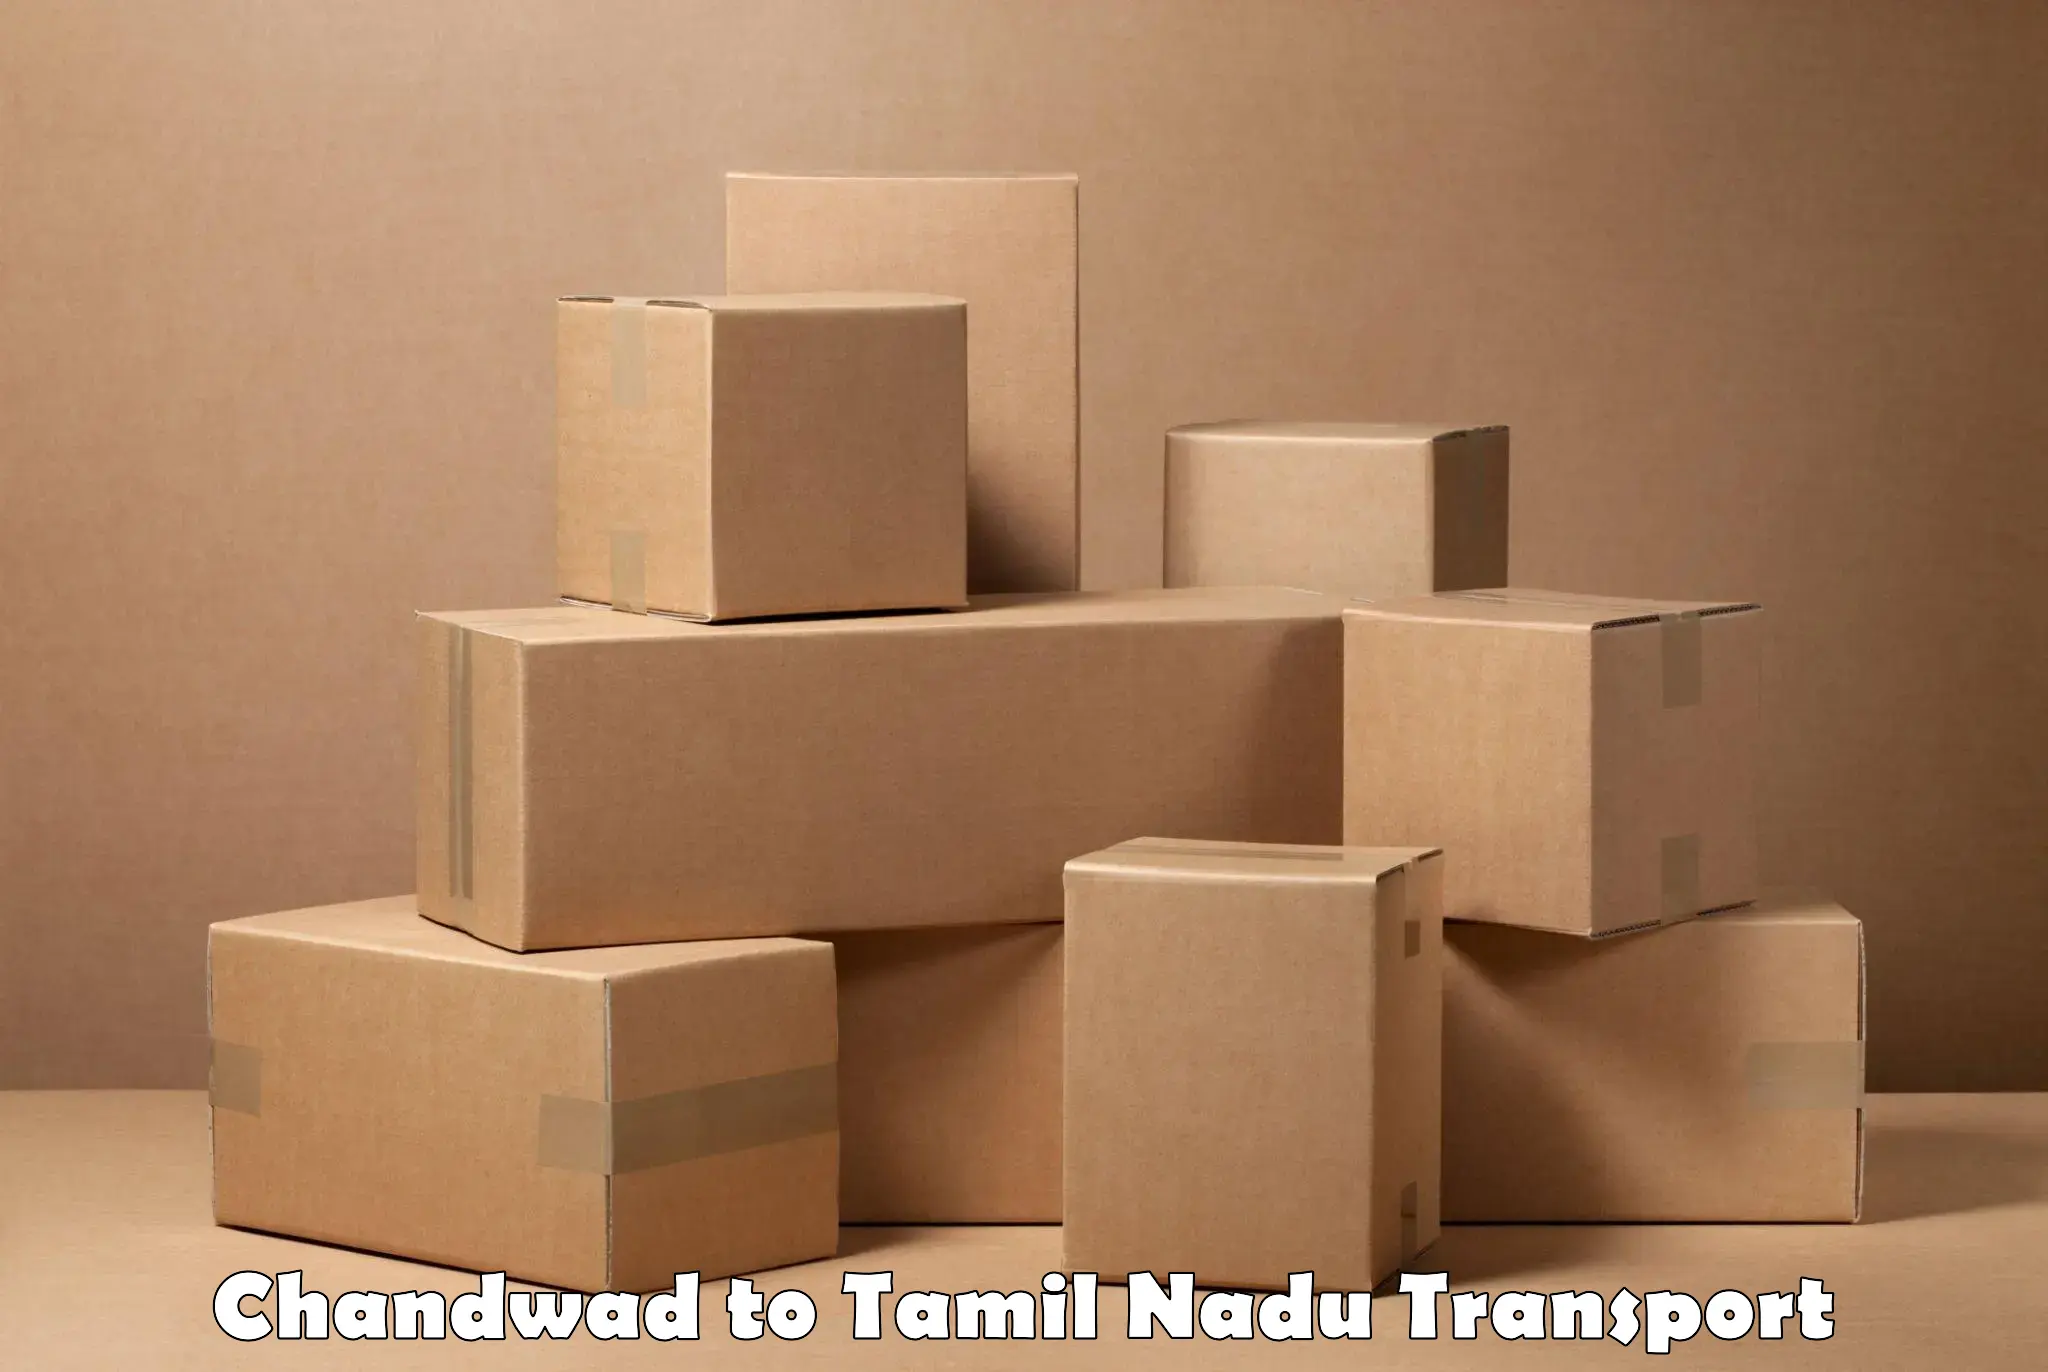 Parcel transport services Chandwad to Ranipet